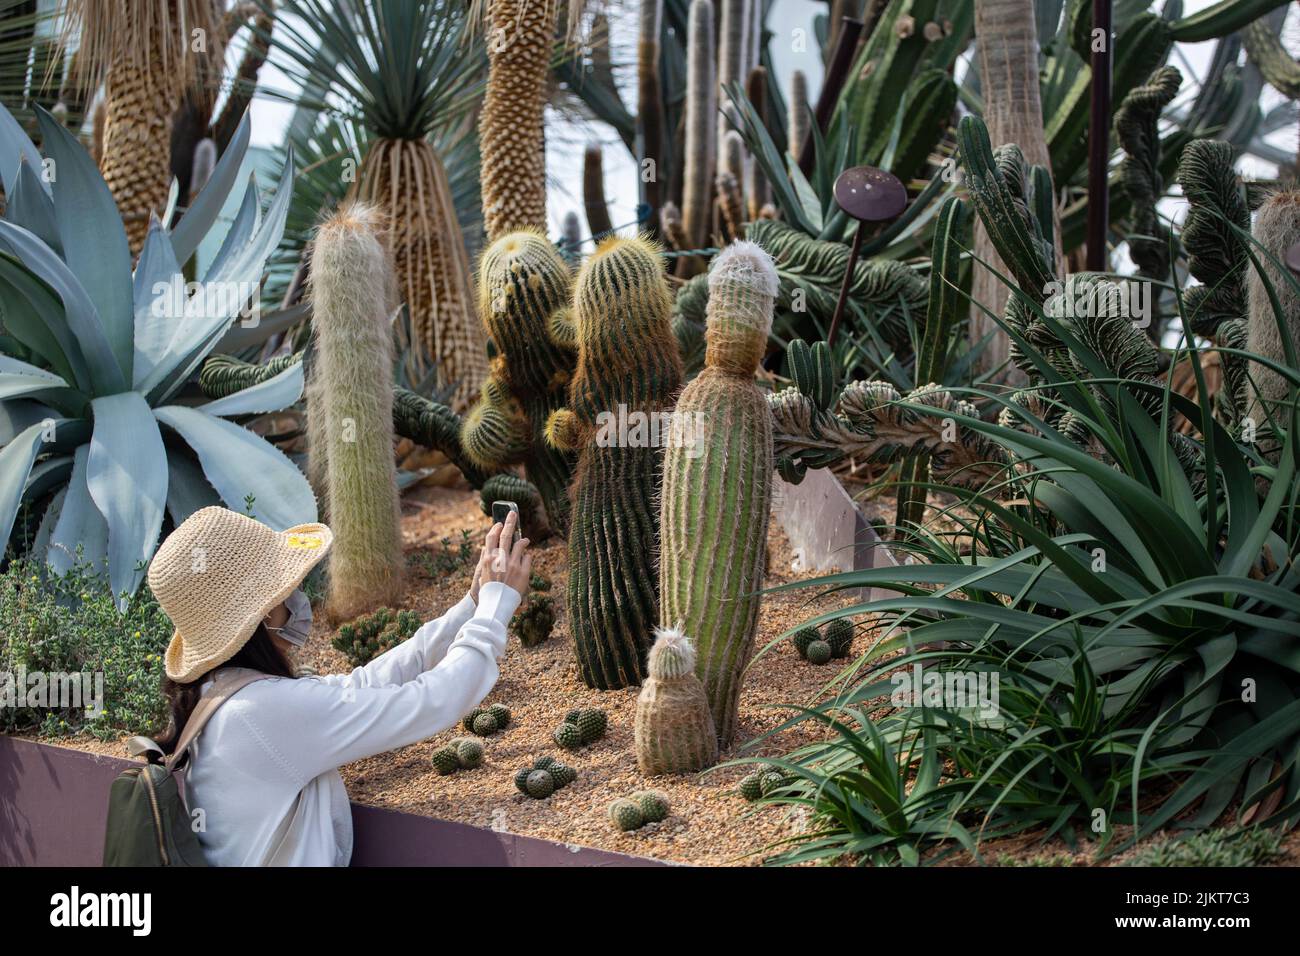 A visitor in straw hat taking picture of the cactus in Gardens by the Bay. Stock Photo